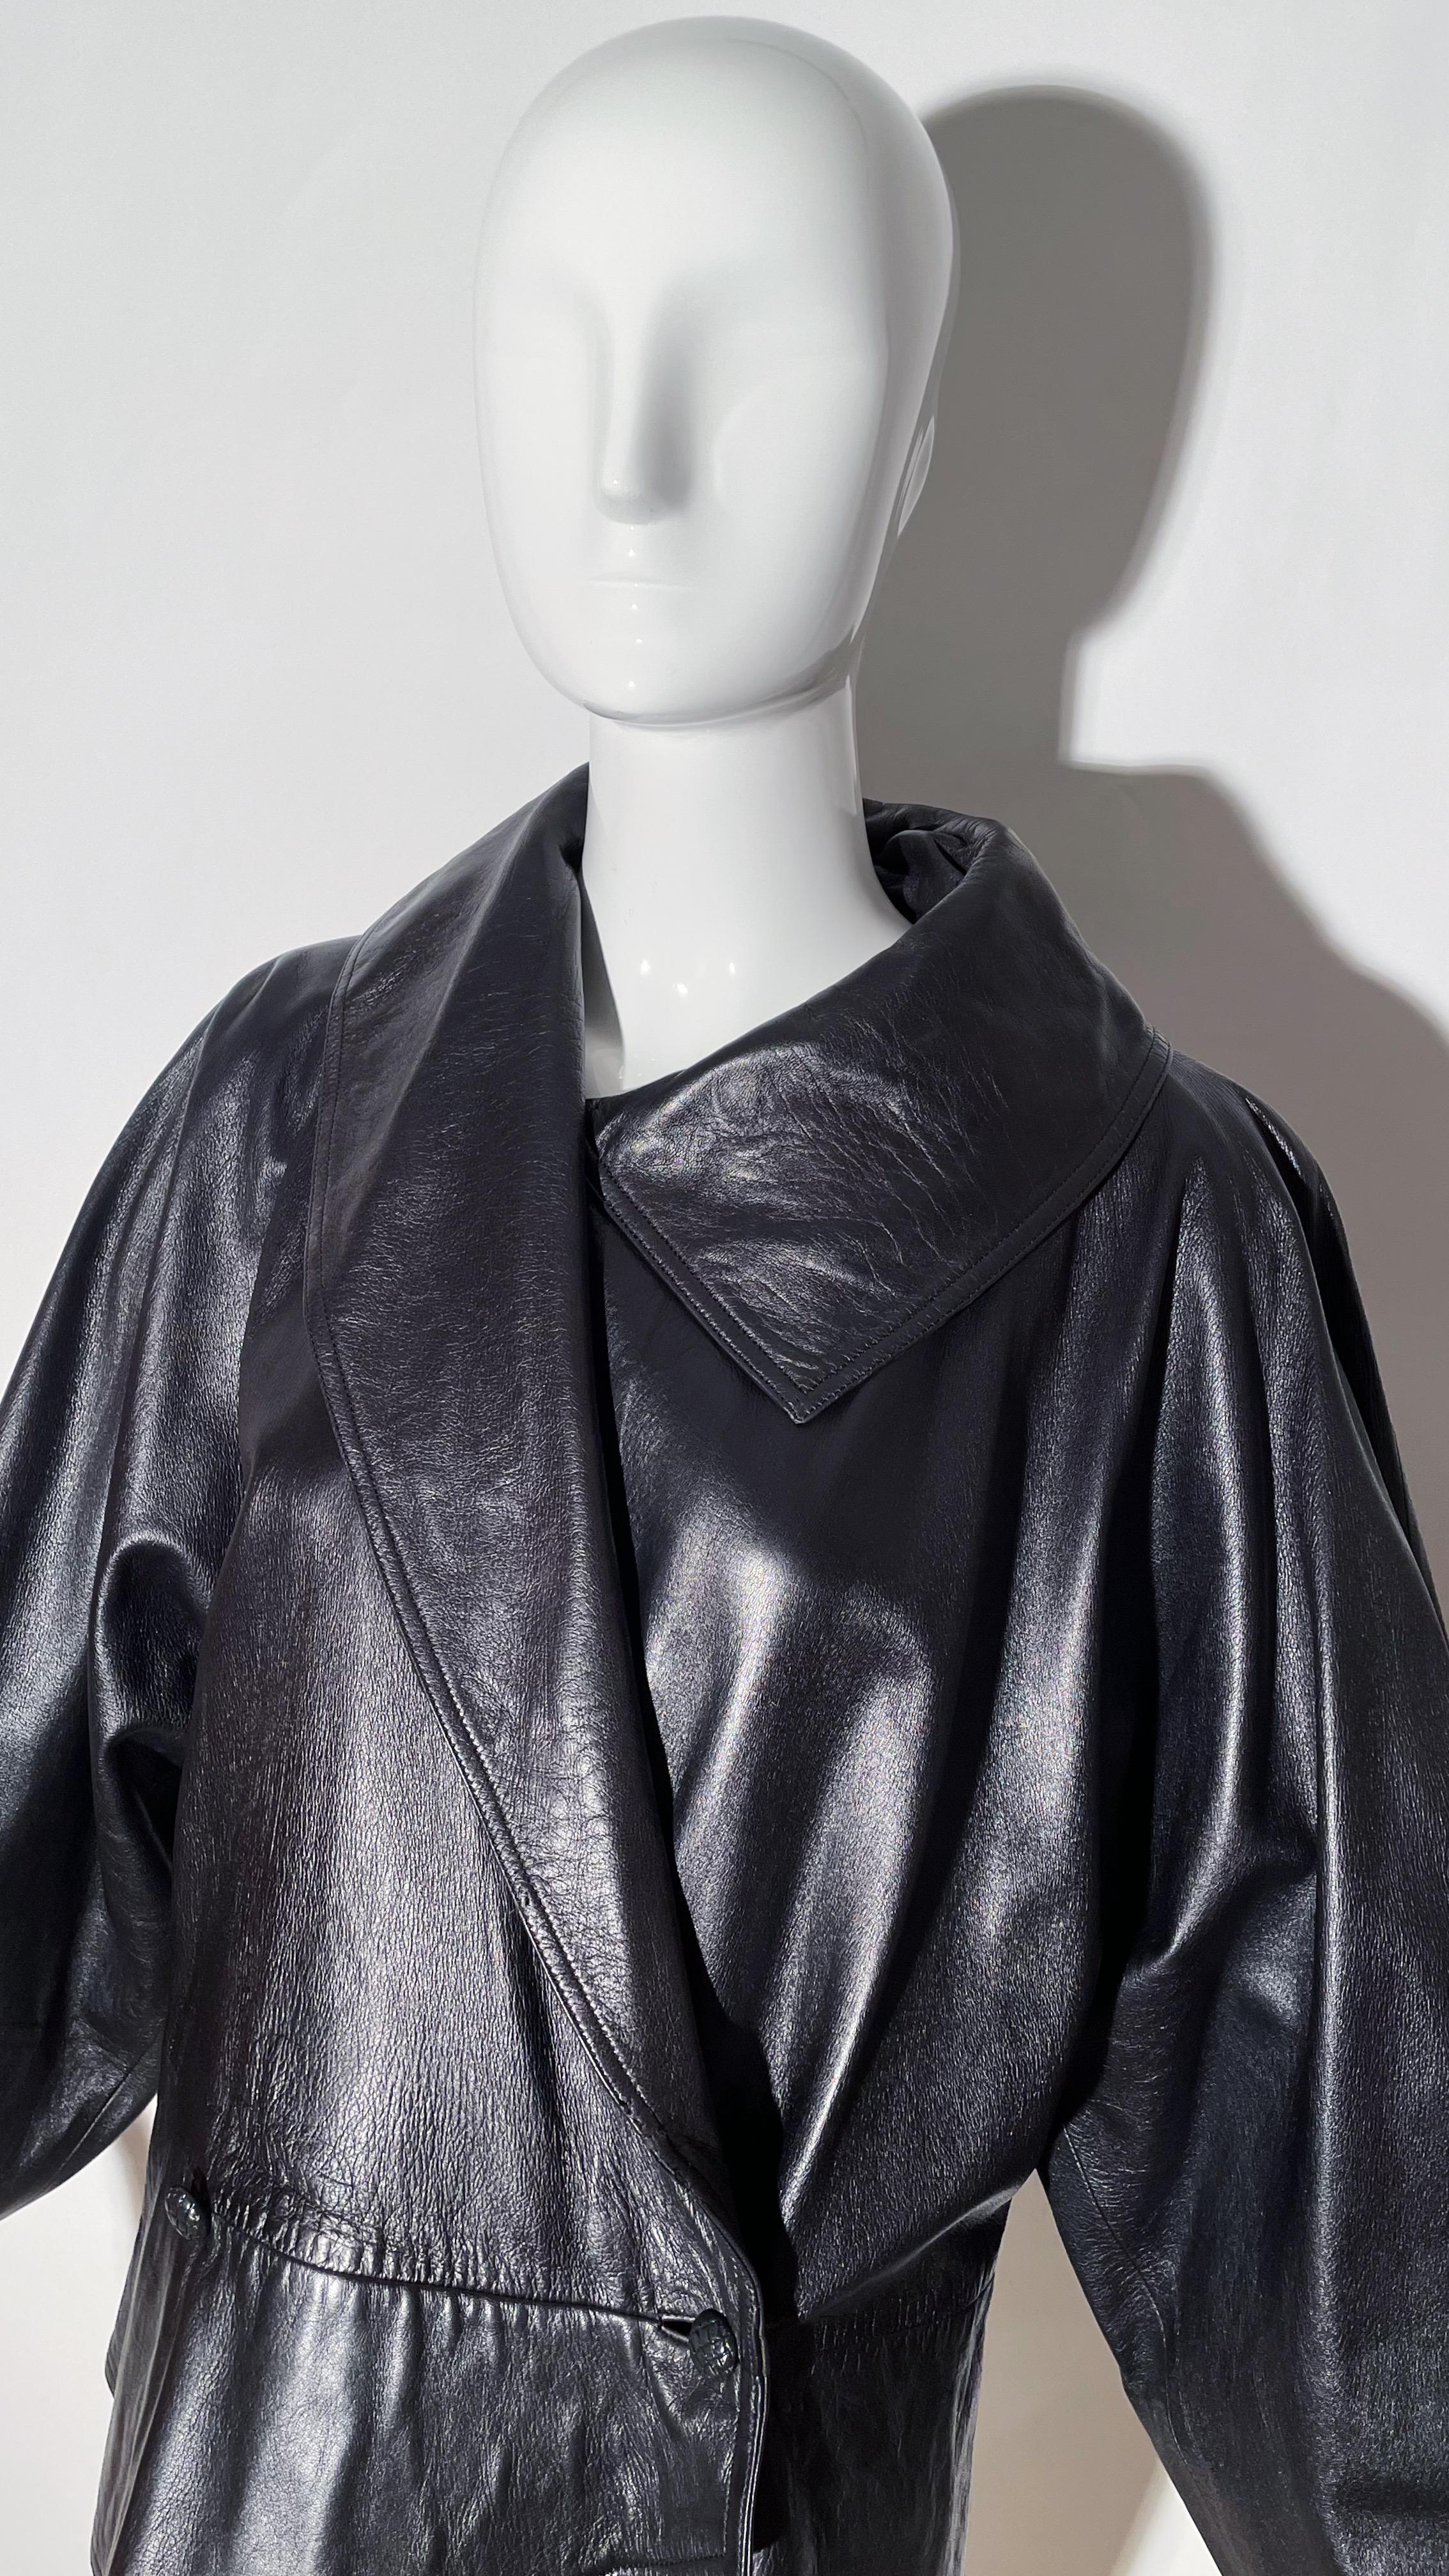 Mario Valentino Peplum Leather Jacket  In Good Condition For Sale In Waterford, MI